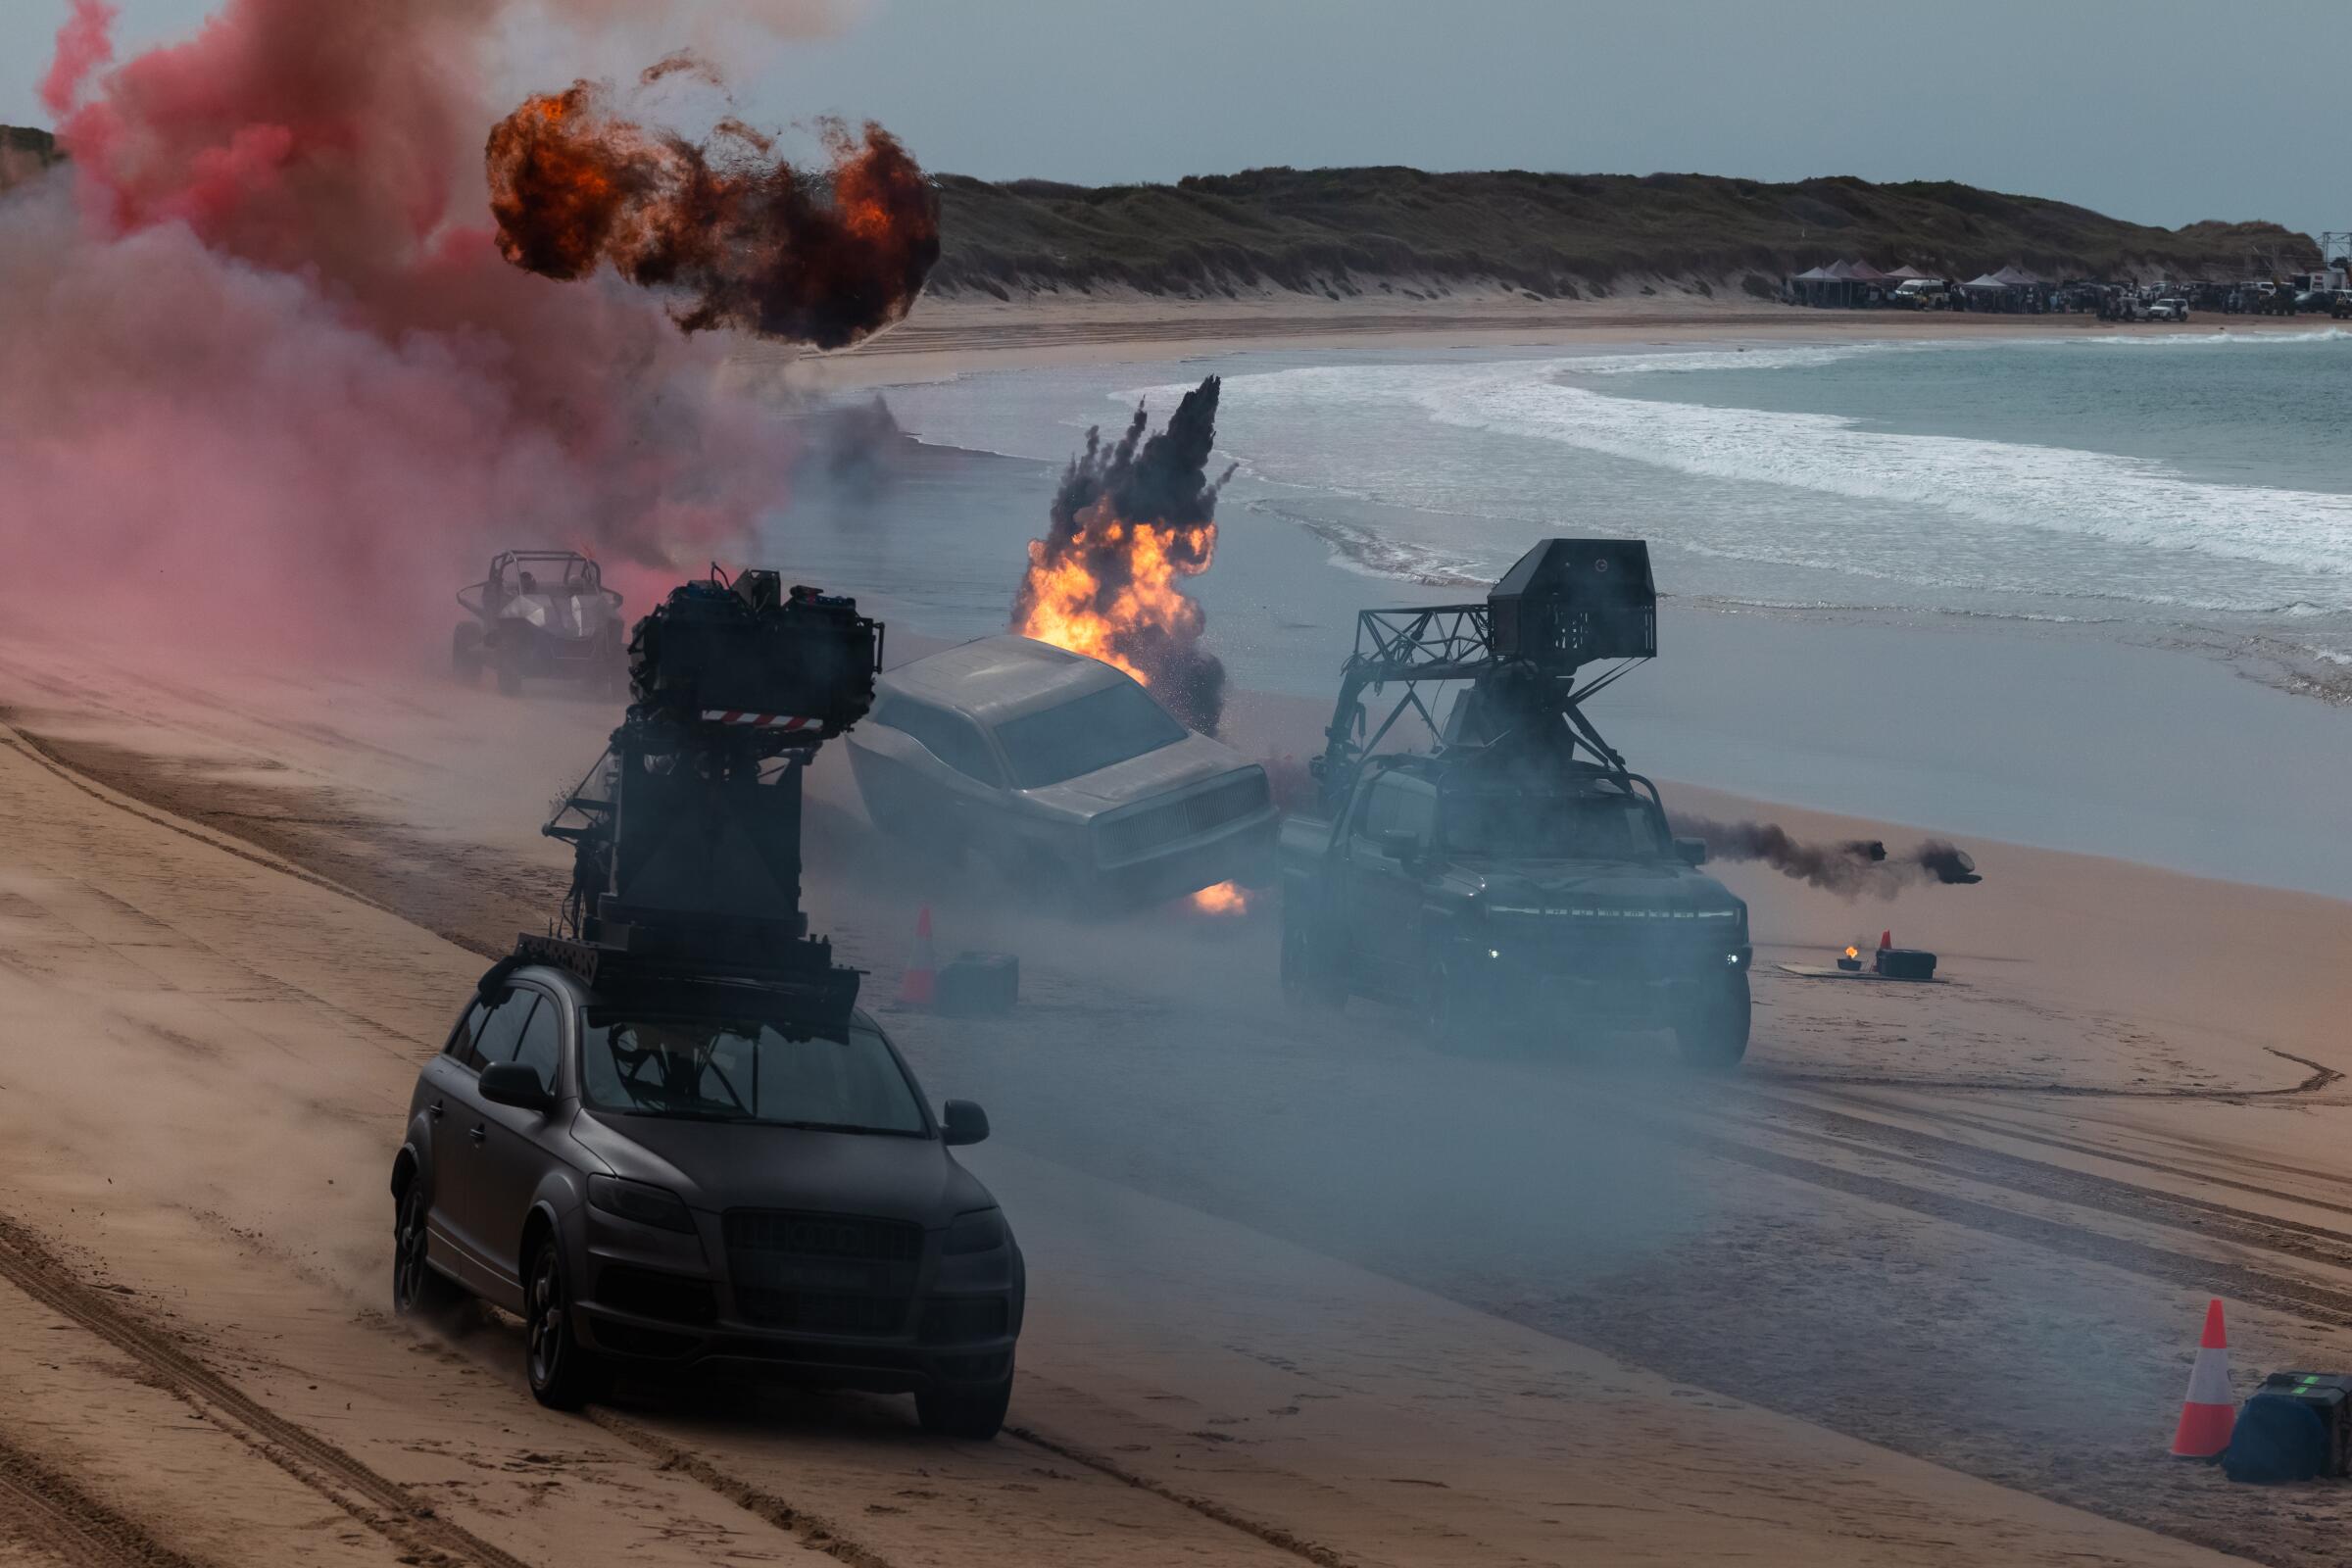 Cars drive through explosions on a curving beach.